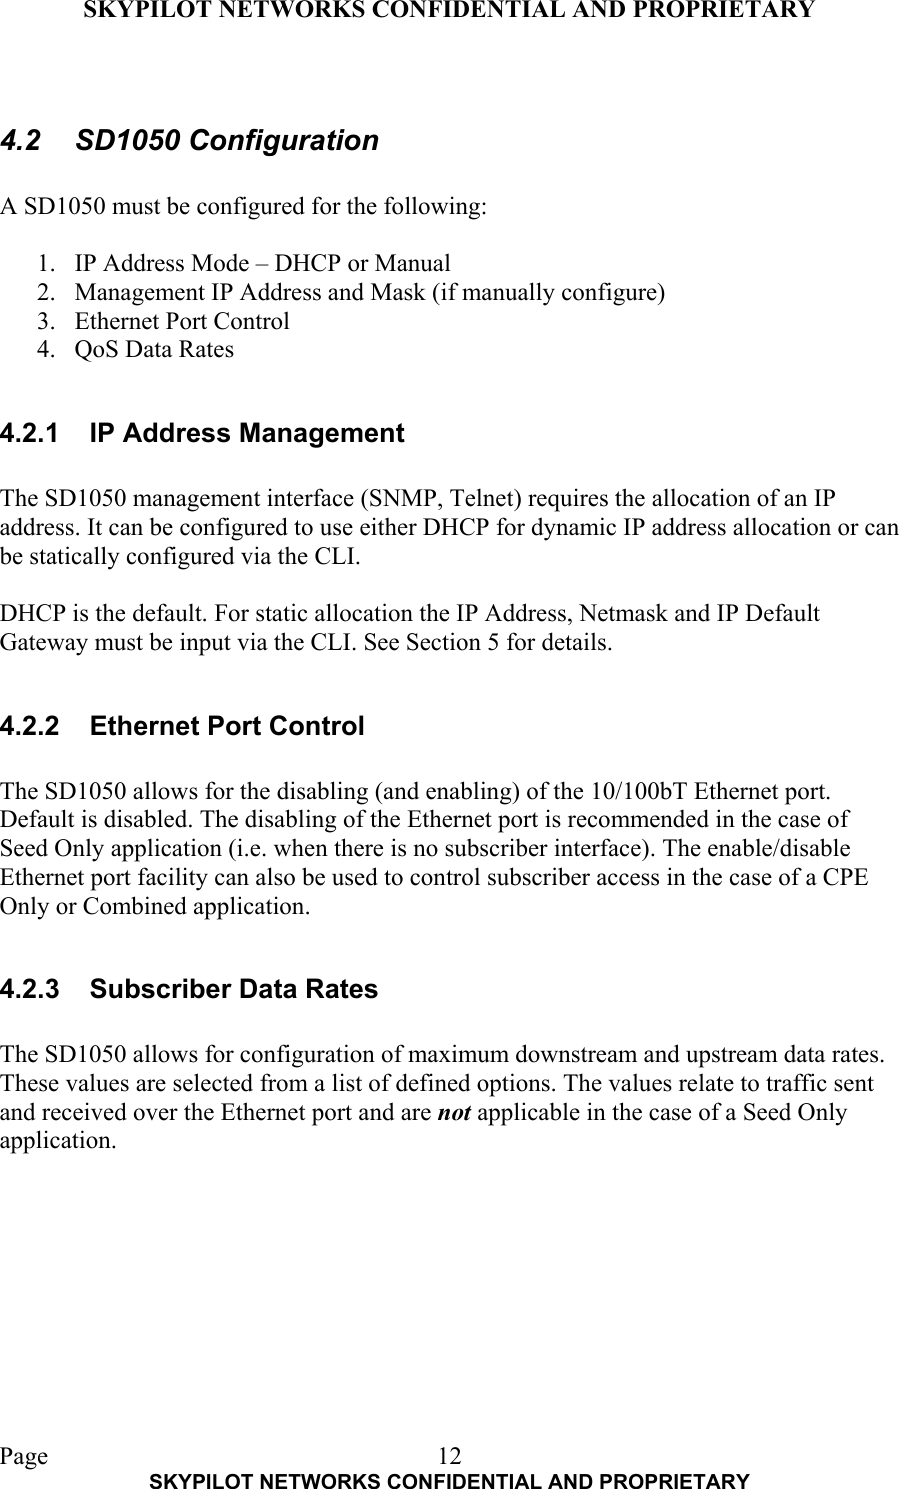 SKYPILOT NETWORKS CONFIDENTIAL AND PROPRIETARY  Page    SKYPILOT NETWORKS CONFIDENTIAL AND PROPRIETARY 12 4.2 SD1050 Configuration  A SD1050 must be configured for the following:  1.  IP Address Mode – DHCP or Manual 2.  Management IP Address and Mask (if manually configure) 3.  Ethernet Port Control 4.  QoS Data Rates  4.2.1  IP Address Management  The SD1050 management interface (SNMP, Telnet) requires the allocation of an IP address. It can be configured to use either DHCP for dynamic IP address allocation or can be statically configured via the CLI.   DHCP is the default. For static allocation the IP Address, Netmask and IP Default Gateway must be input via the CLI. See Section 5 for details.  4.2.2  Ethernet Port Control  The SD1050 allows for the disabling (and enabling) of the 10/100bT Ethernet port. Default is disabled. The disabling of the Ethernet port is recommended in the case of Seed Only application (i.e. when there is no subscriber interface). The enable/disable Ethernet port facility can also be used to control subscriber access in the case of a CPE Only or Combined application.  4.2.3  Subscriber Data Rates  The SD1050 allows for configuration of maximum downstream and upstream data rates. These values are selected from a list of defined options. The values relate to traffic sent and received over the Ethernet port and are not applicable in the case of a Seed Only application.  